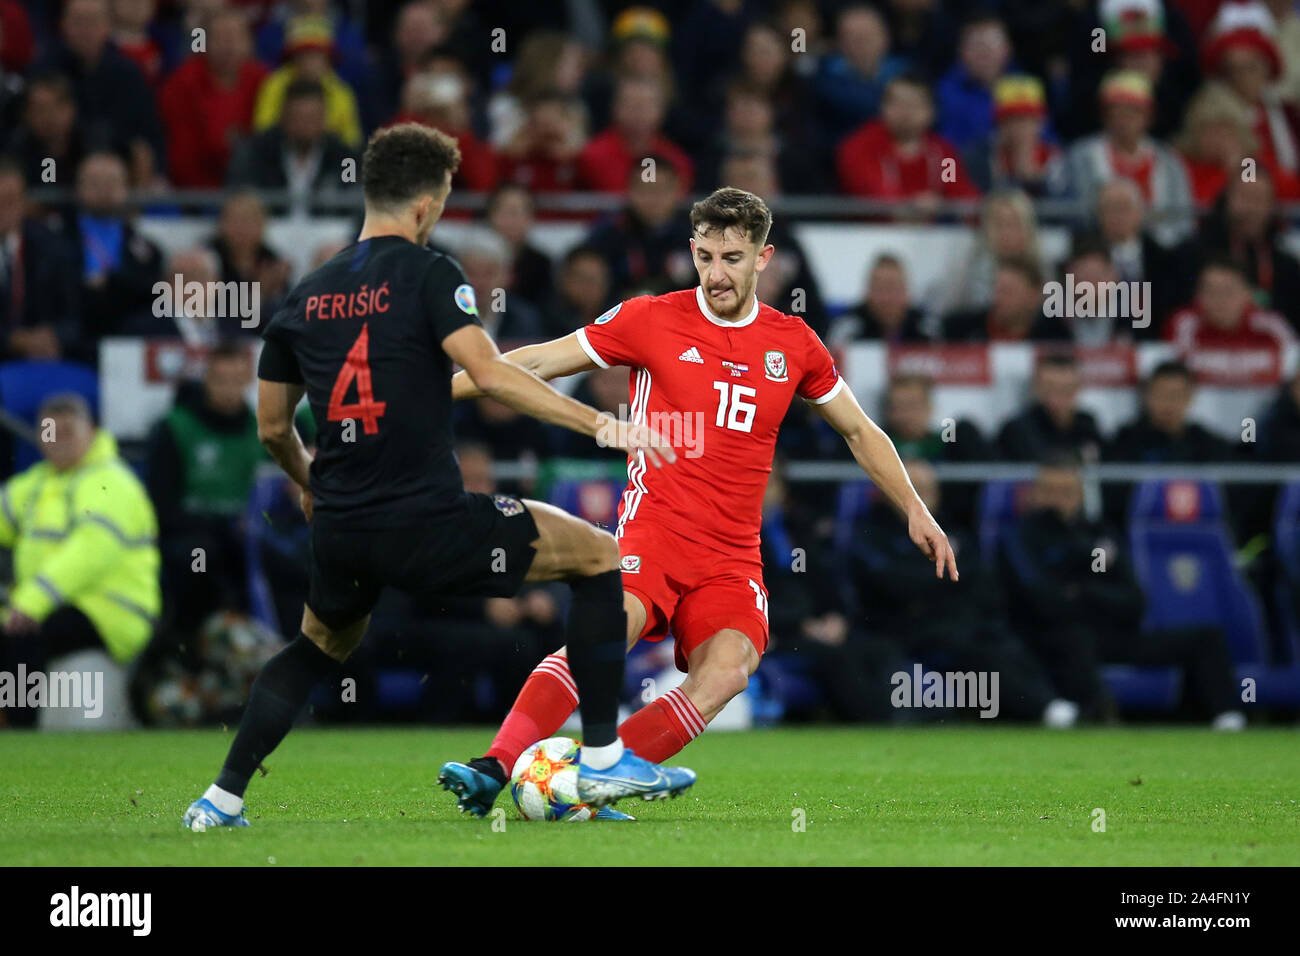 Cardiff, UK. 13th Oct, 2019. Tom Lockyer of Wales (16) is challenged by Ivan Perisic of Croatia. UEFA Euro 2020 qualifier match, Wales v Croatia at the Cardiff city Stadium in Cardiff, South Wales on Sunday 13th October 2019. pic by Andrew Orchard /Andrew Orchard sports photography/Alamy live News EDITORIAL USE ONLY Credit: Andrew Orchard sports photography/Alamy Live News Stock Photo